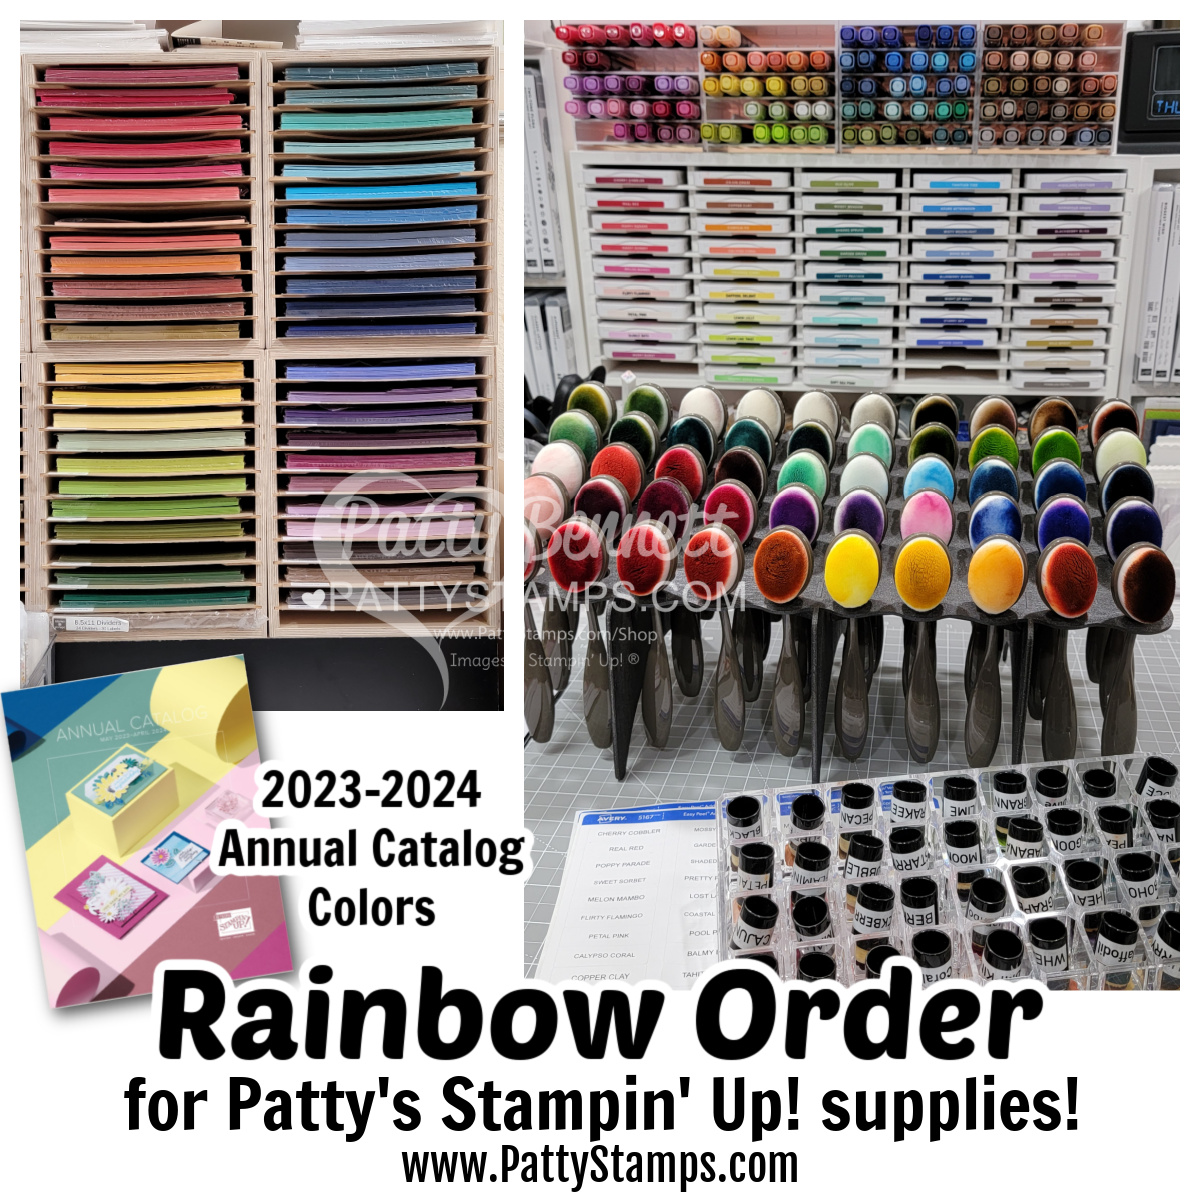 Patty's Stampin' Up! Rainbow Order 2023 2024 - Patty Stamps